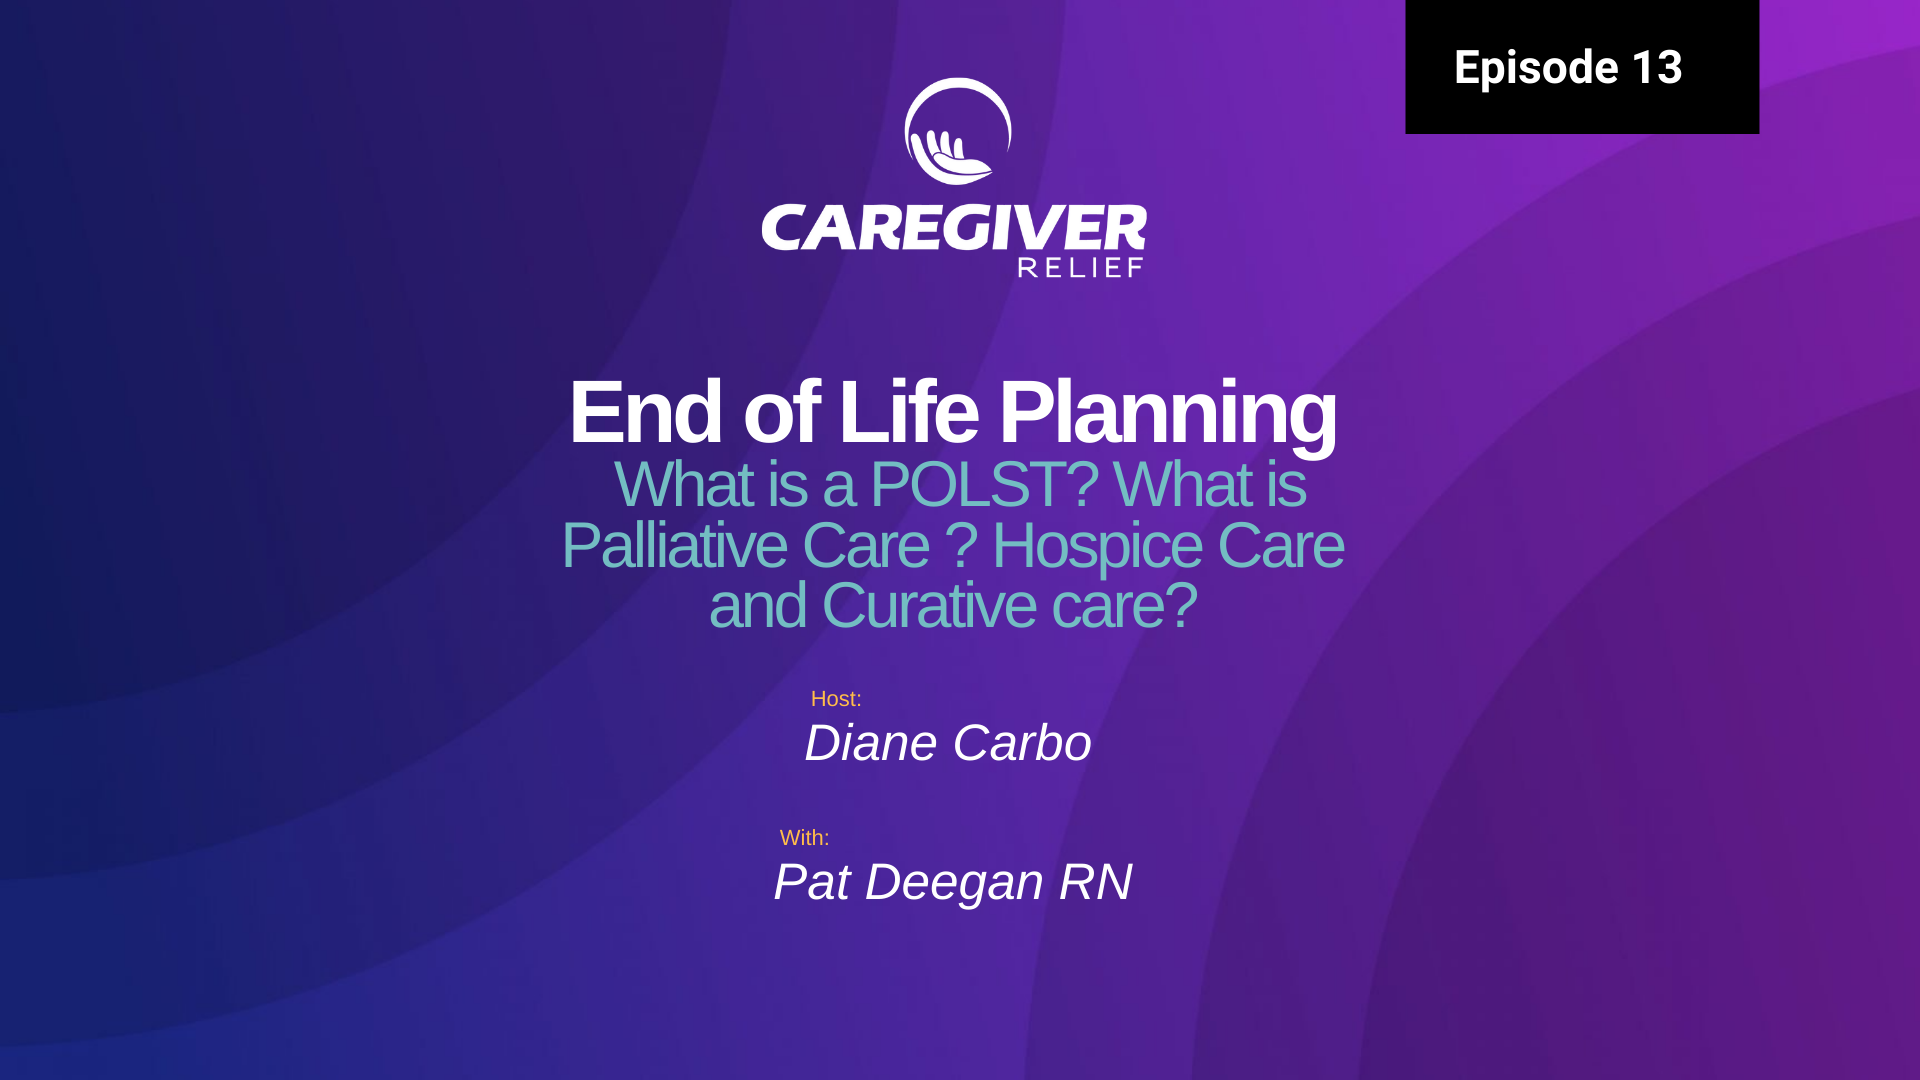 Episode 13 – Pat Deegan RN – End of Life Planning. What is a POLST? What is Palliative Care, Hospice Care and Curative Care?